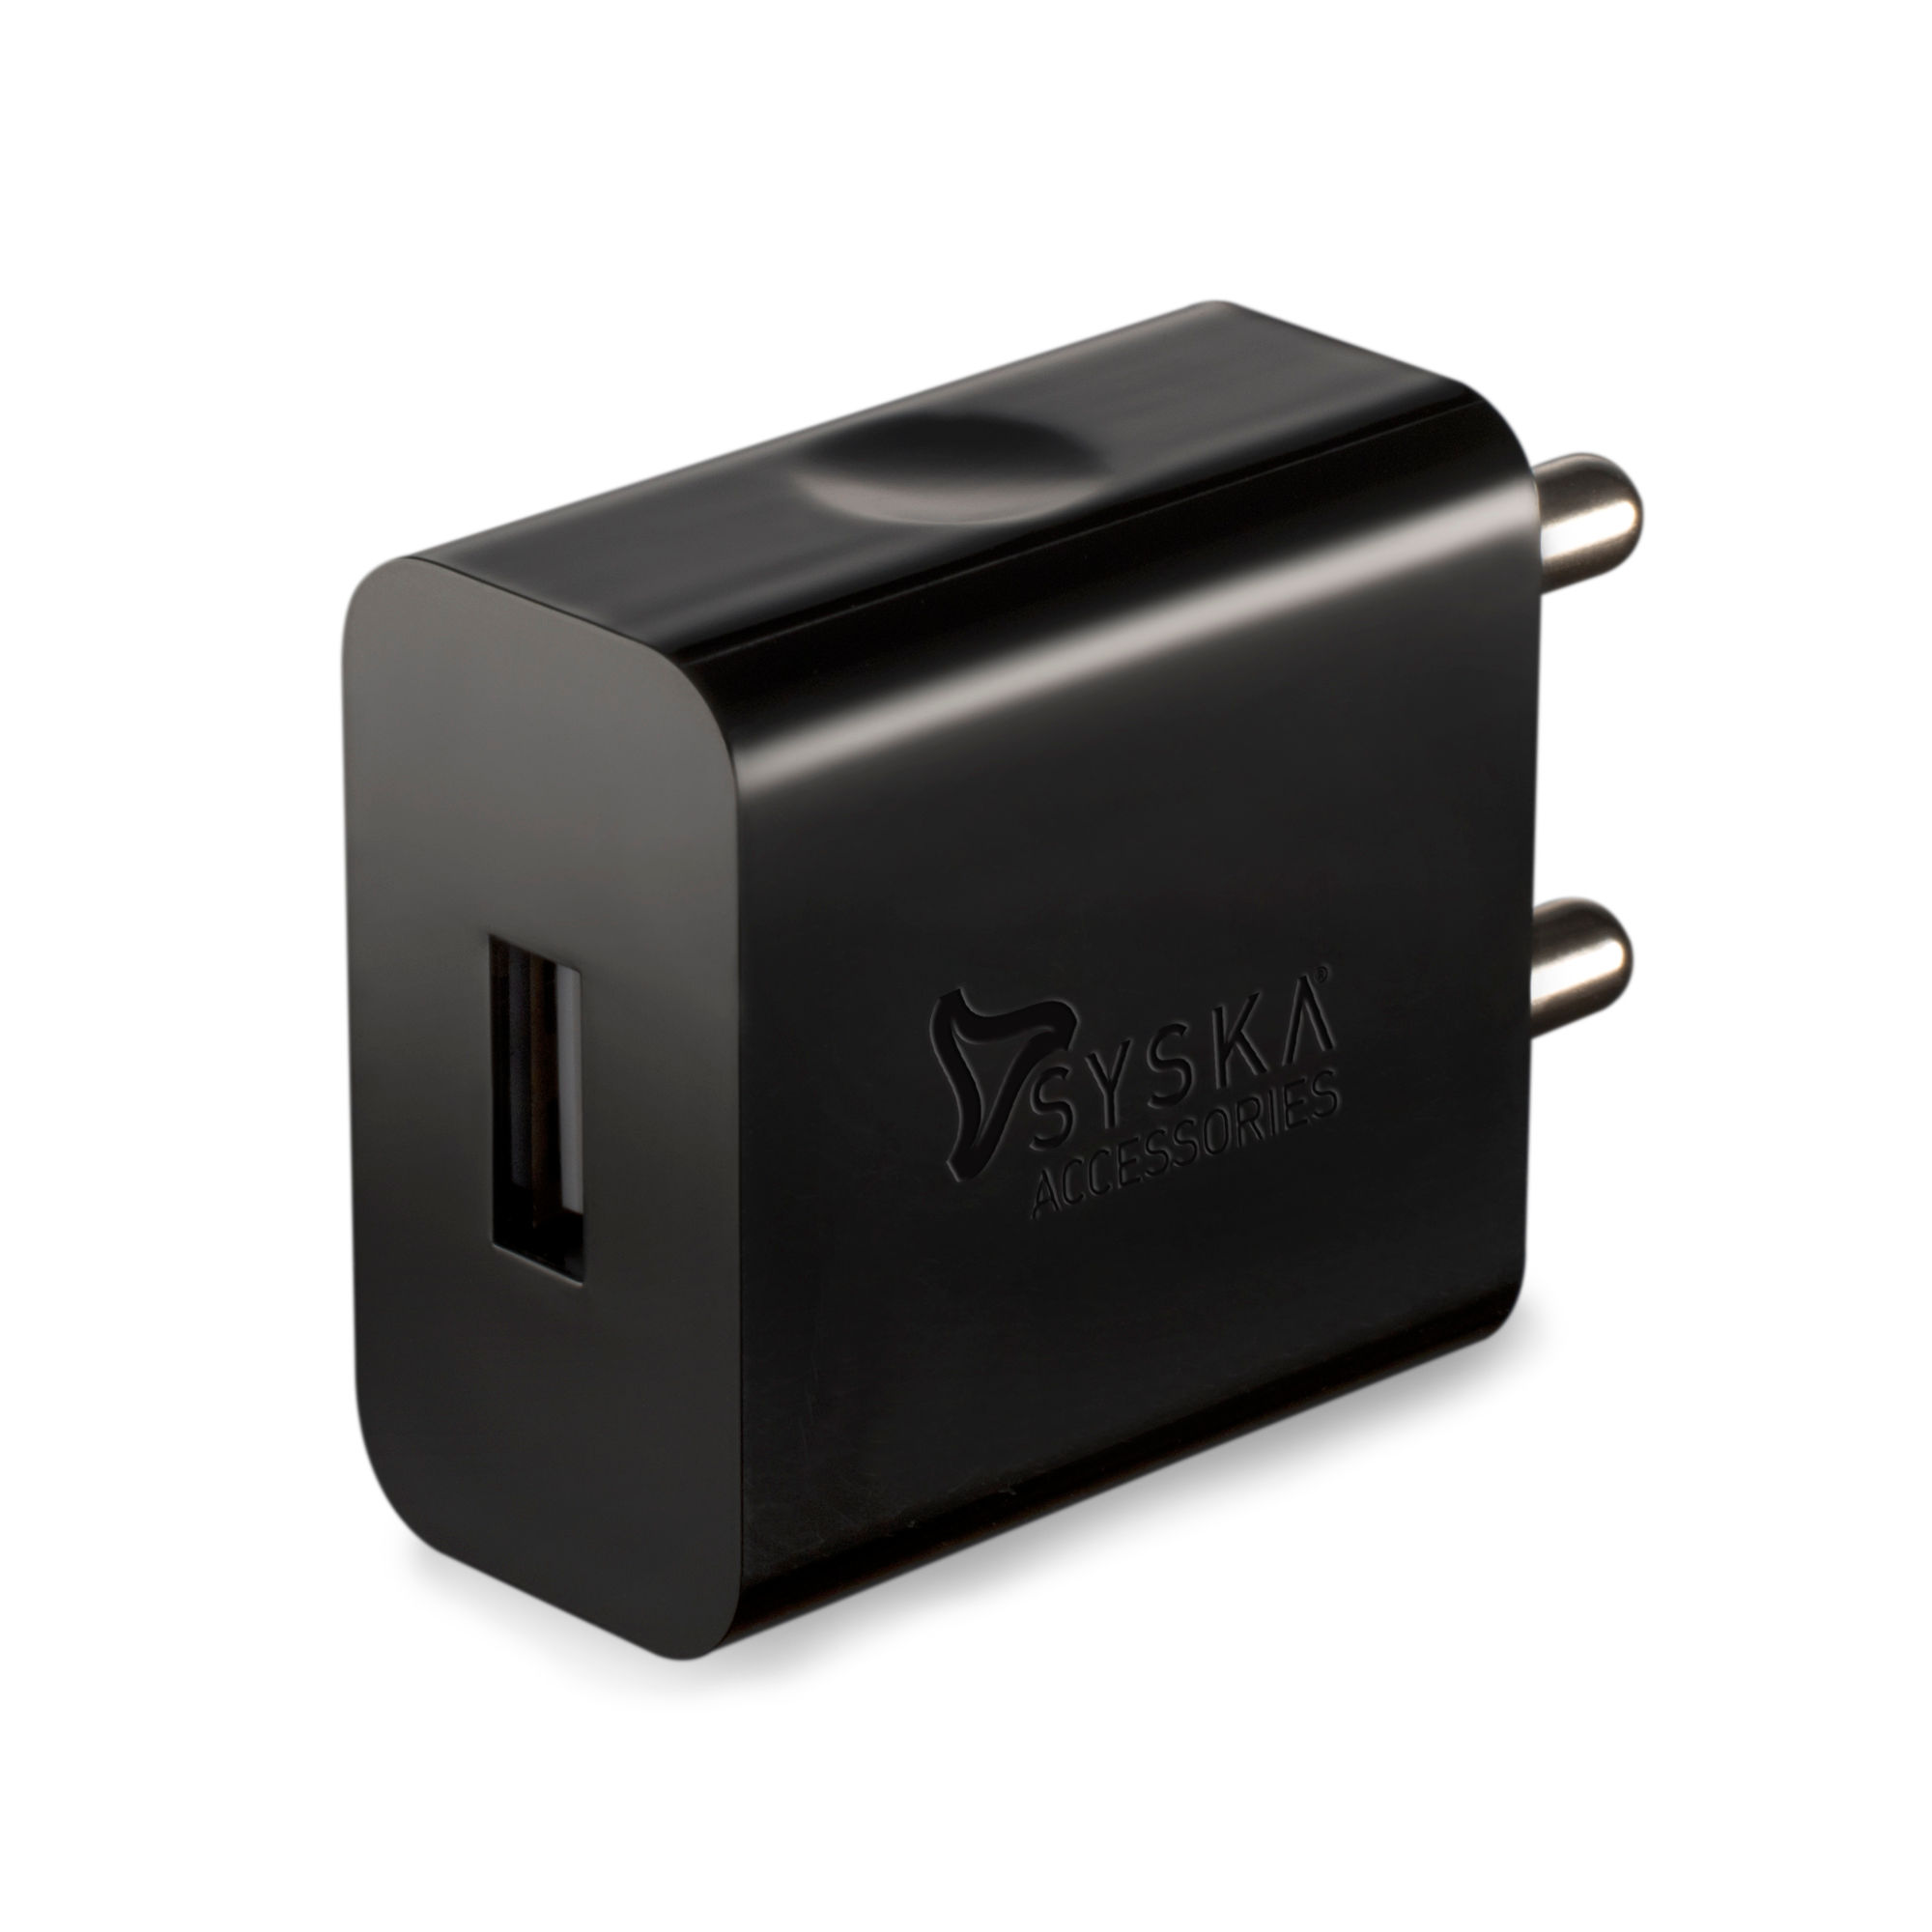 Syska Accessories Wc-2a Charger With Single Port For Fast Charging (black)